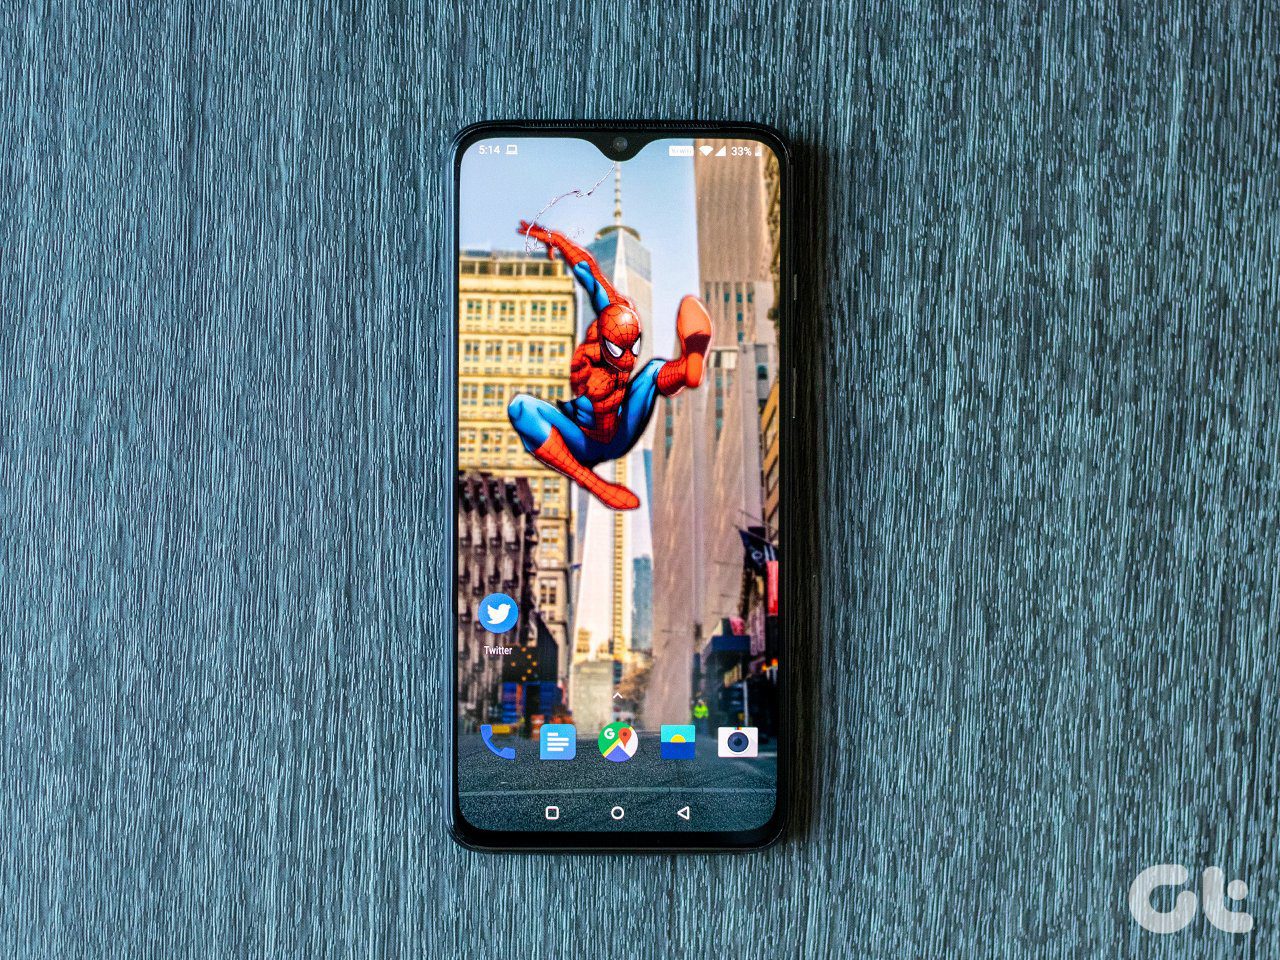 Best Wallpaper Android Apps in 2020 parallex